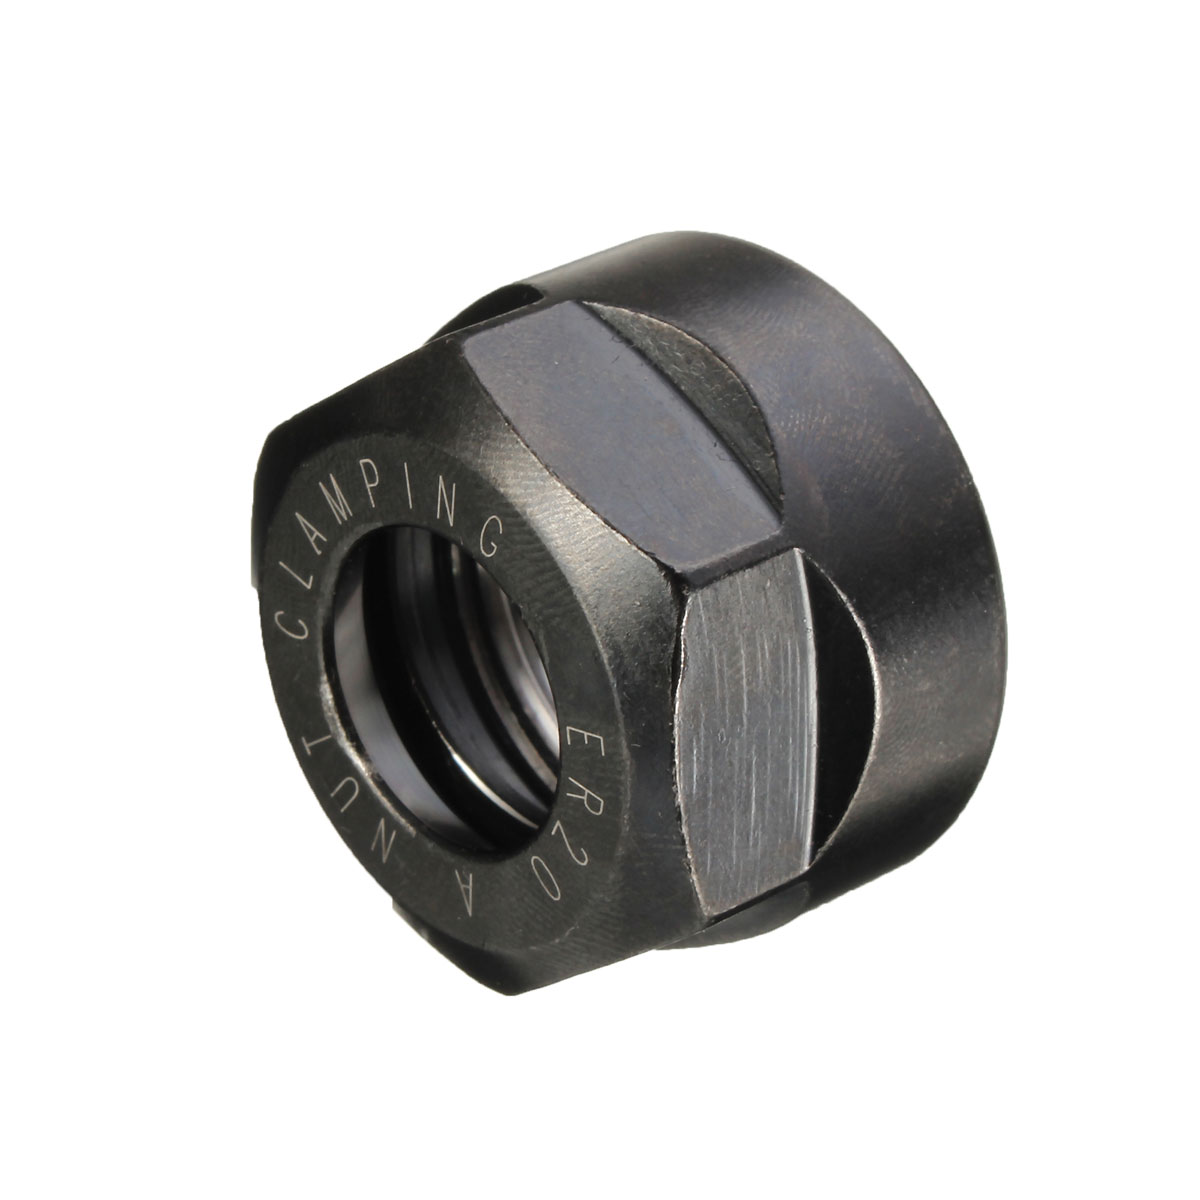 ER--A-M-Type-Nut-Collet-Clamping-Nut-for-CNC-Milling-Chuck-Holder-Lathe-Tool-1064956-4